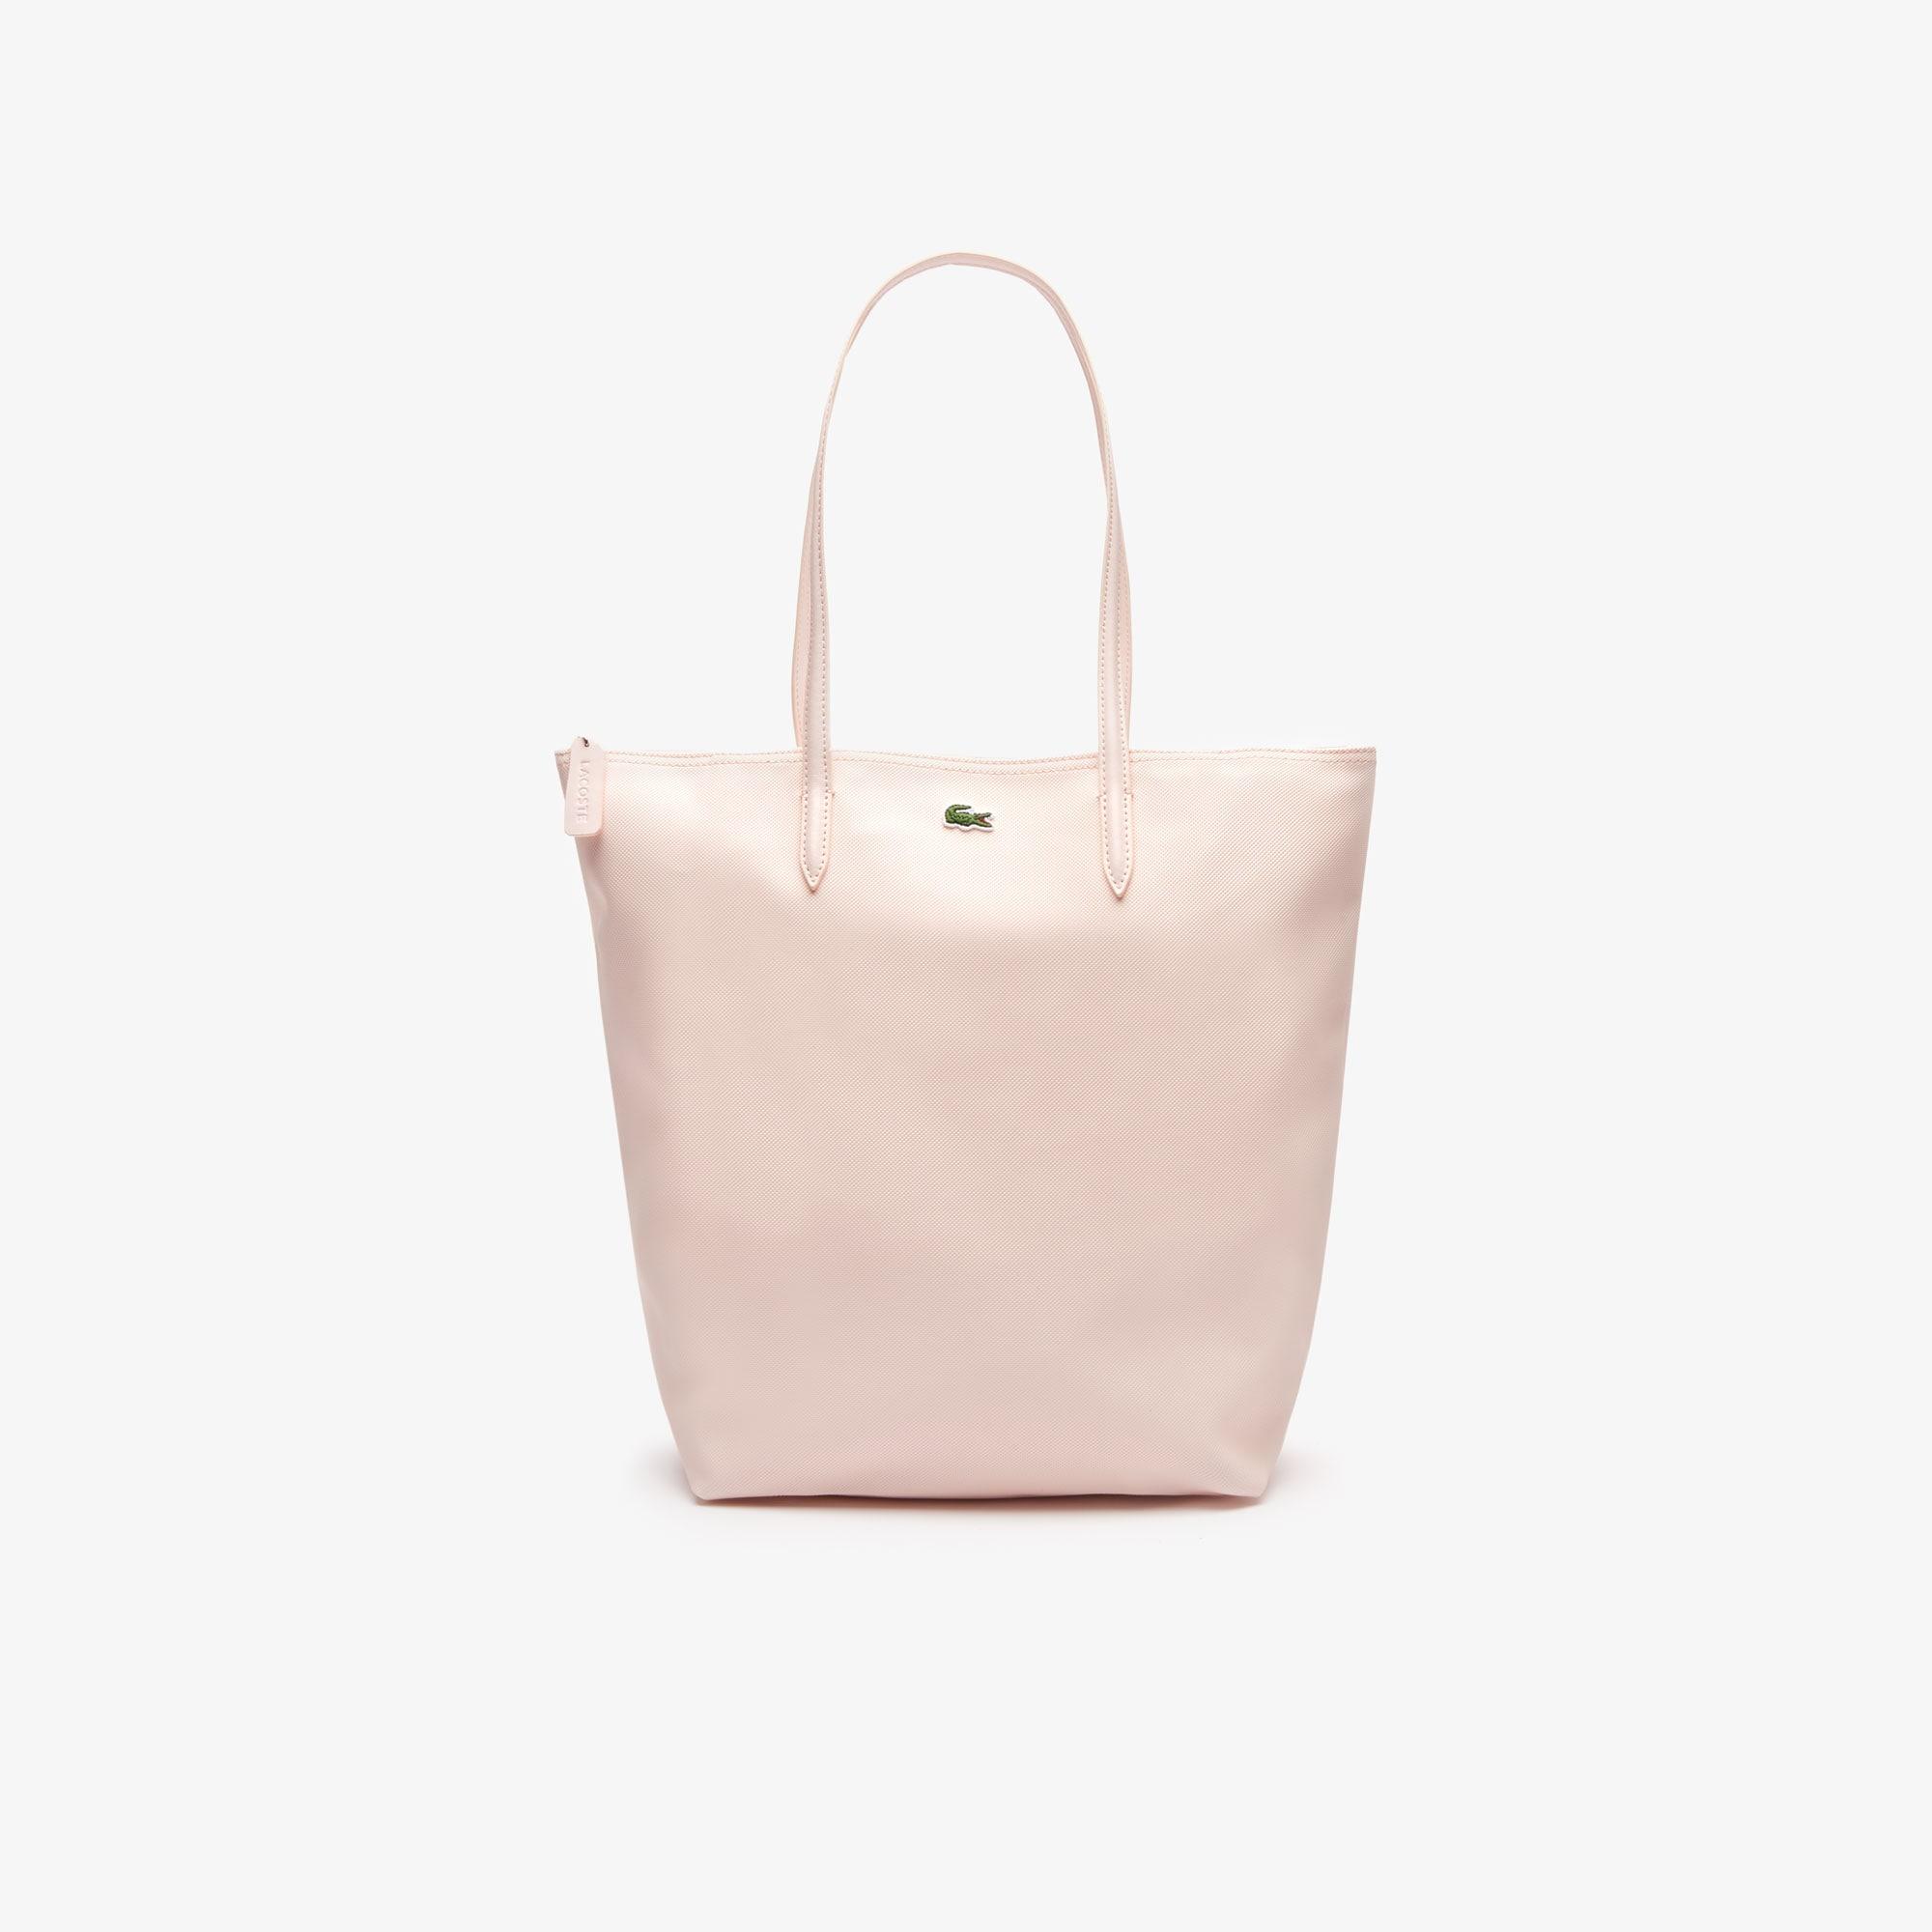 Lacoste Women's L.12.12 Vertical Tote Bag in Pearl (Pink) - Lyst